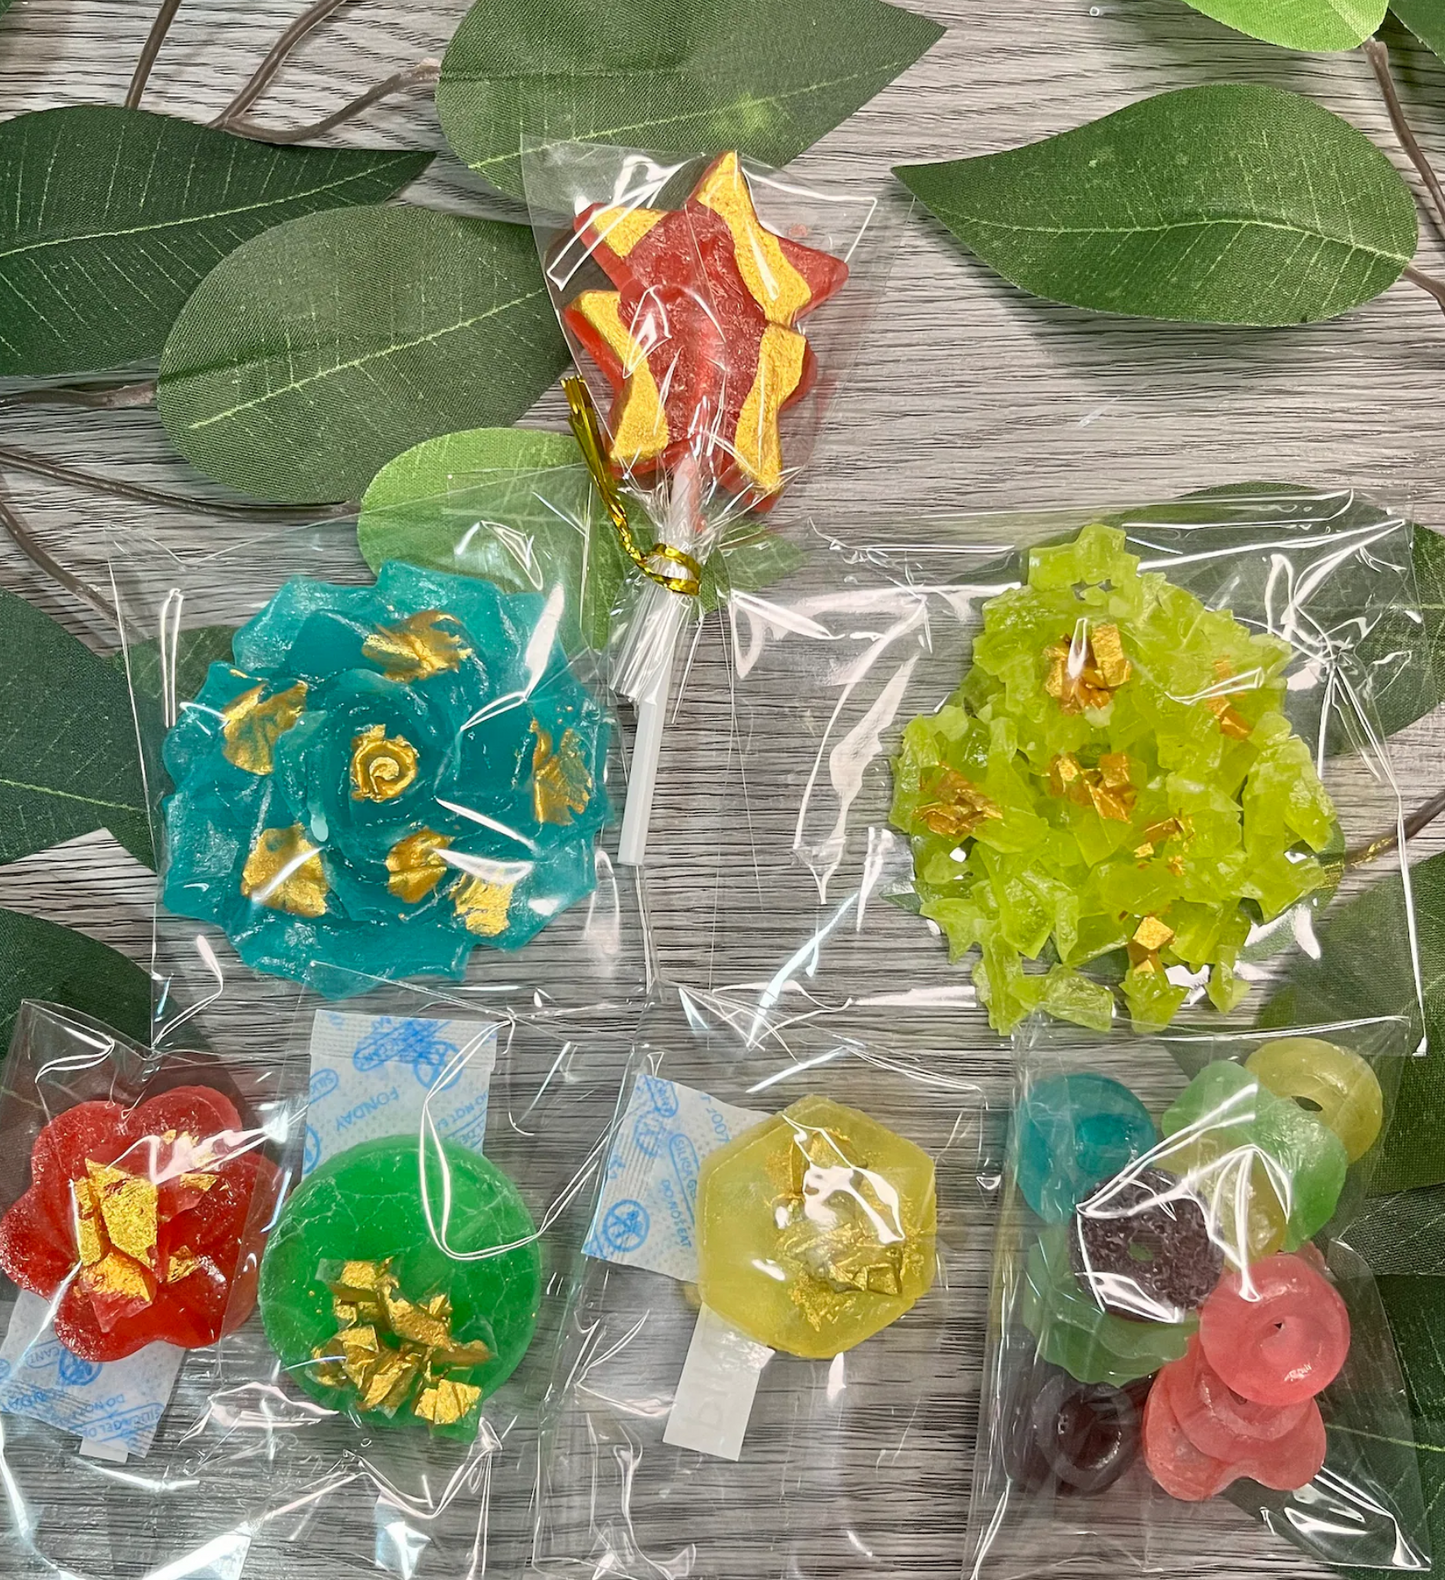 The “EVERYTHING” Luxury Box includes: Lollipop, Flower, Cluster, 1 assorted shapes bag and 3 Gemmies! All items come in assorted shapes, colours and flavours!